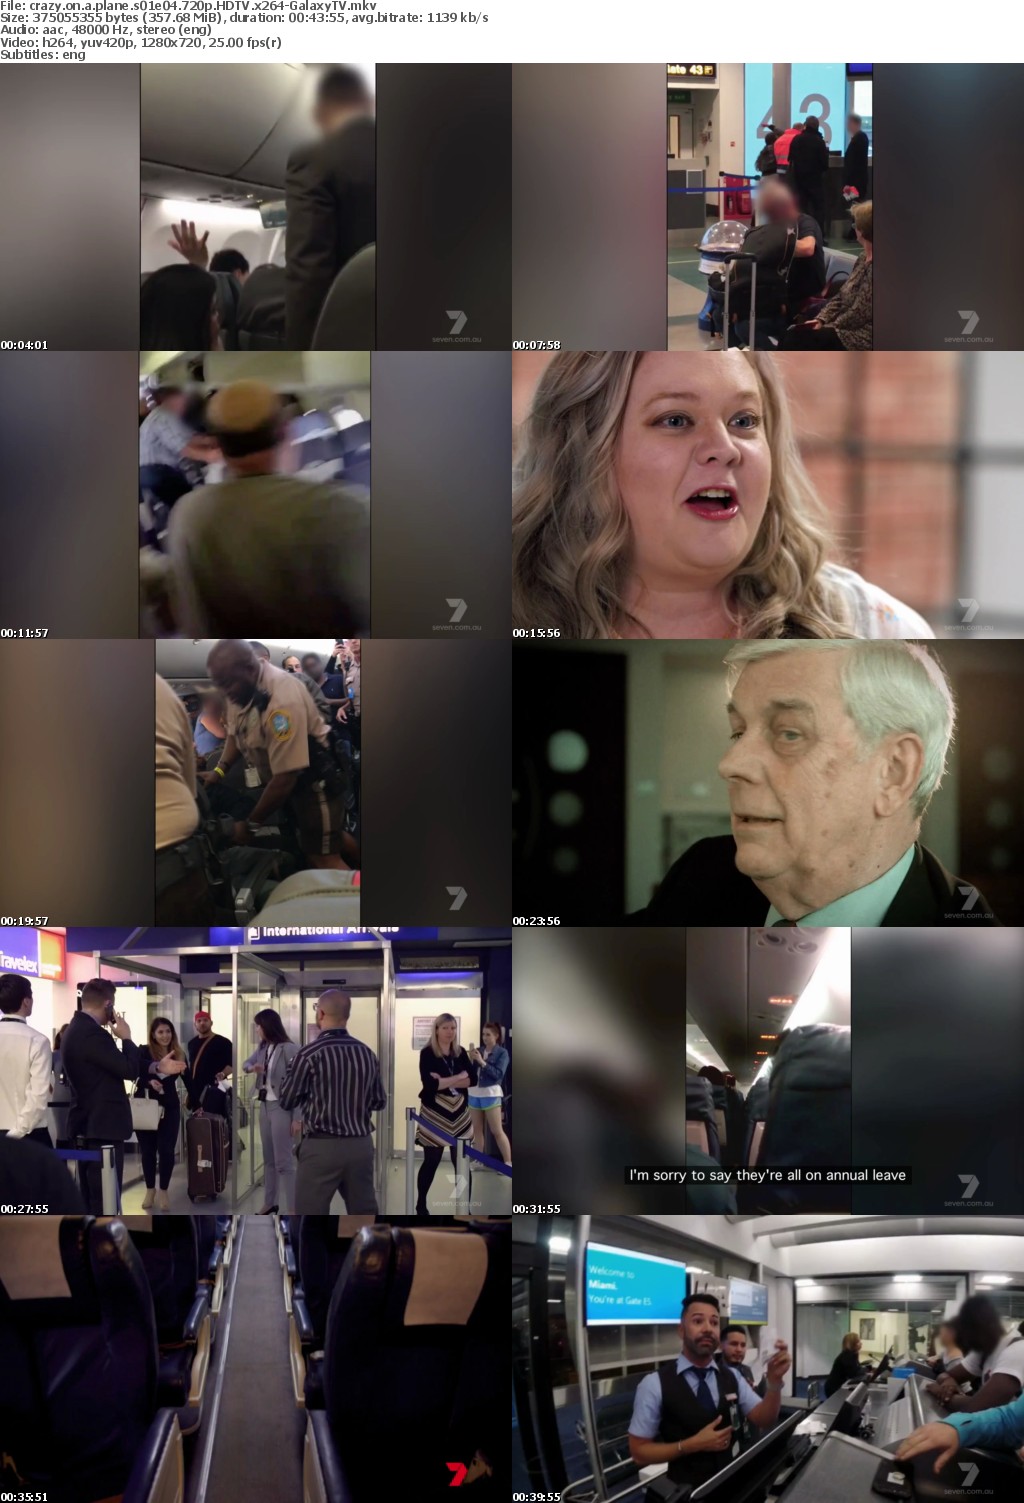 Crazy On A Plane S01 COMPLETE 720p HDTV x264-GalaxyTV